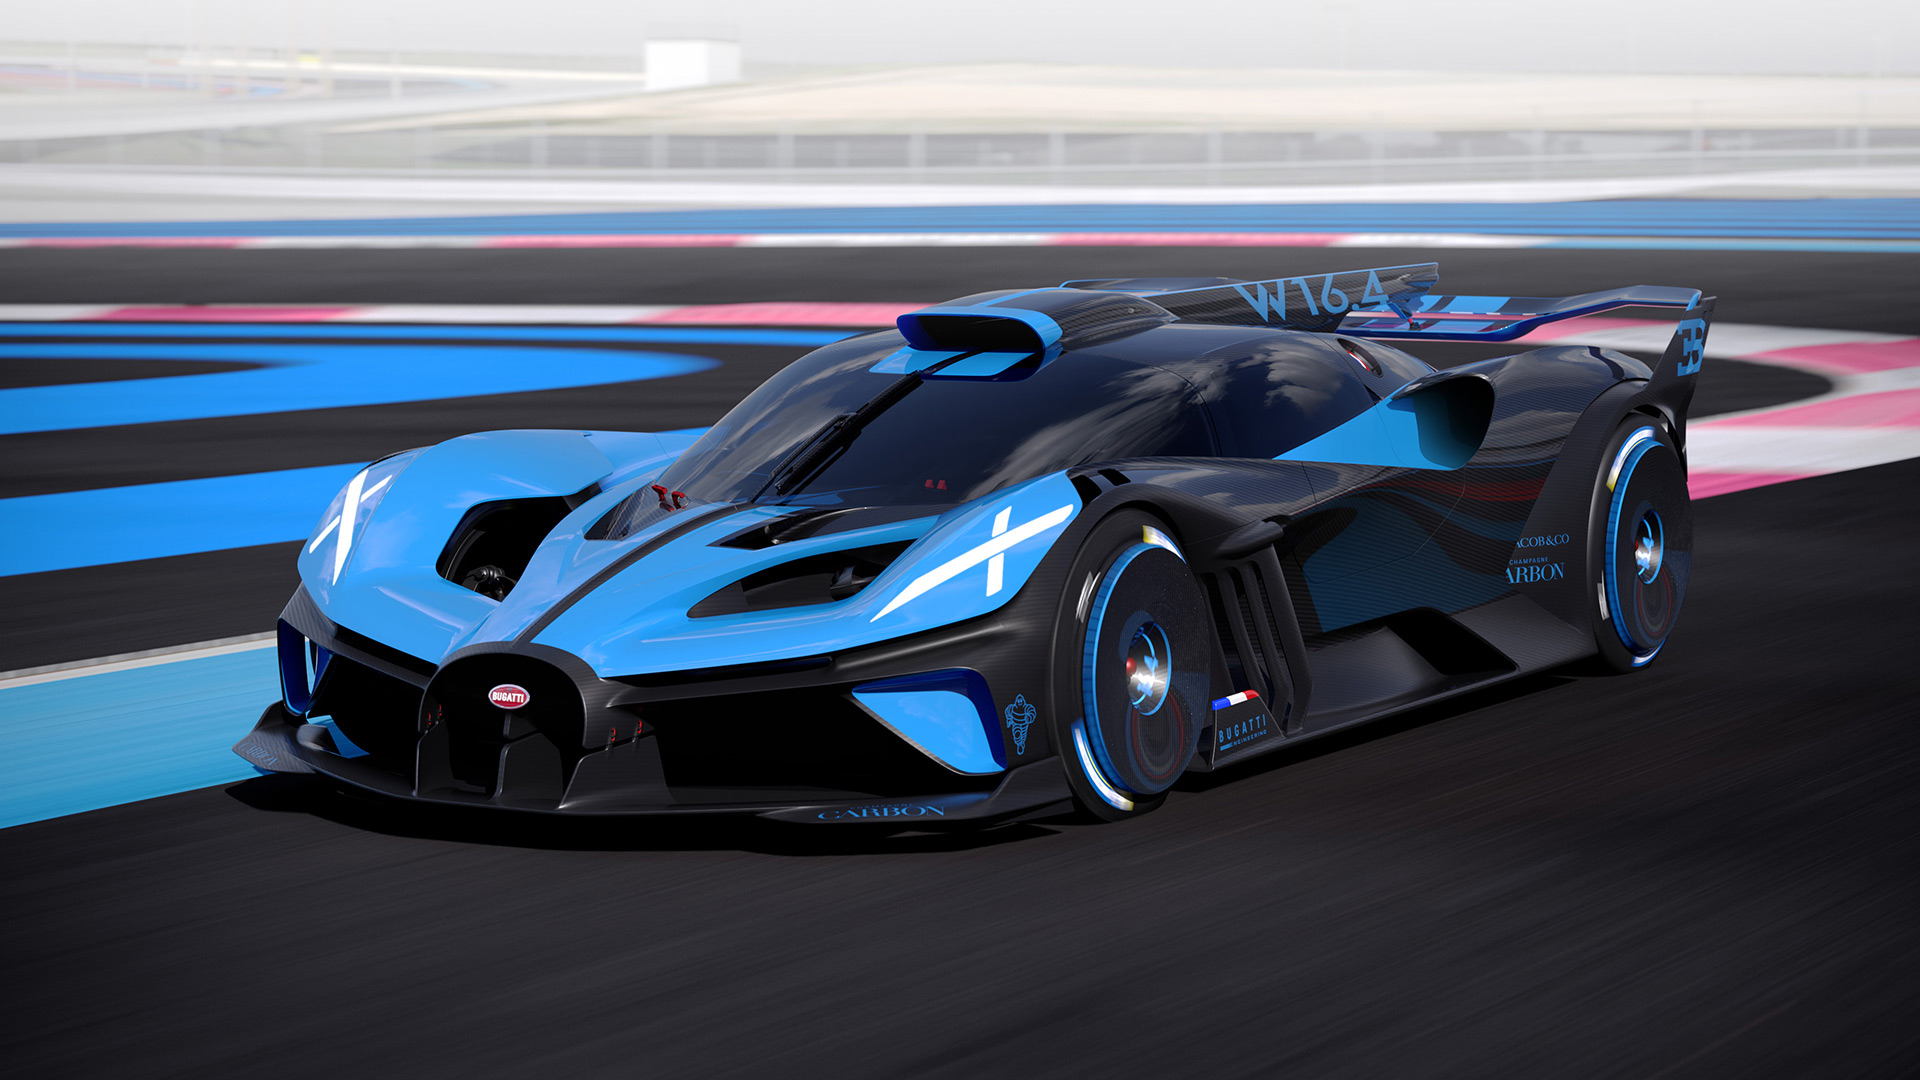 Bugatti Bolide is a 1,824-horsepower hypercar designed for the track